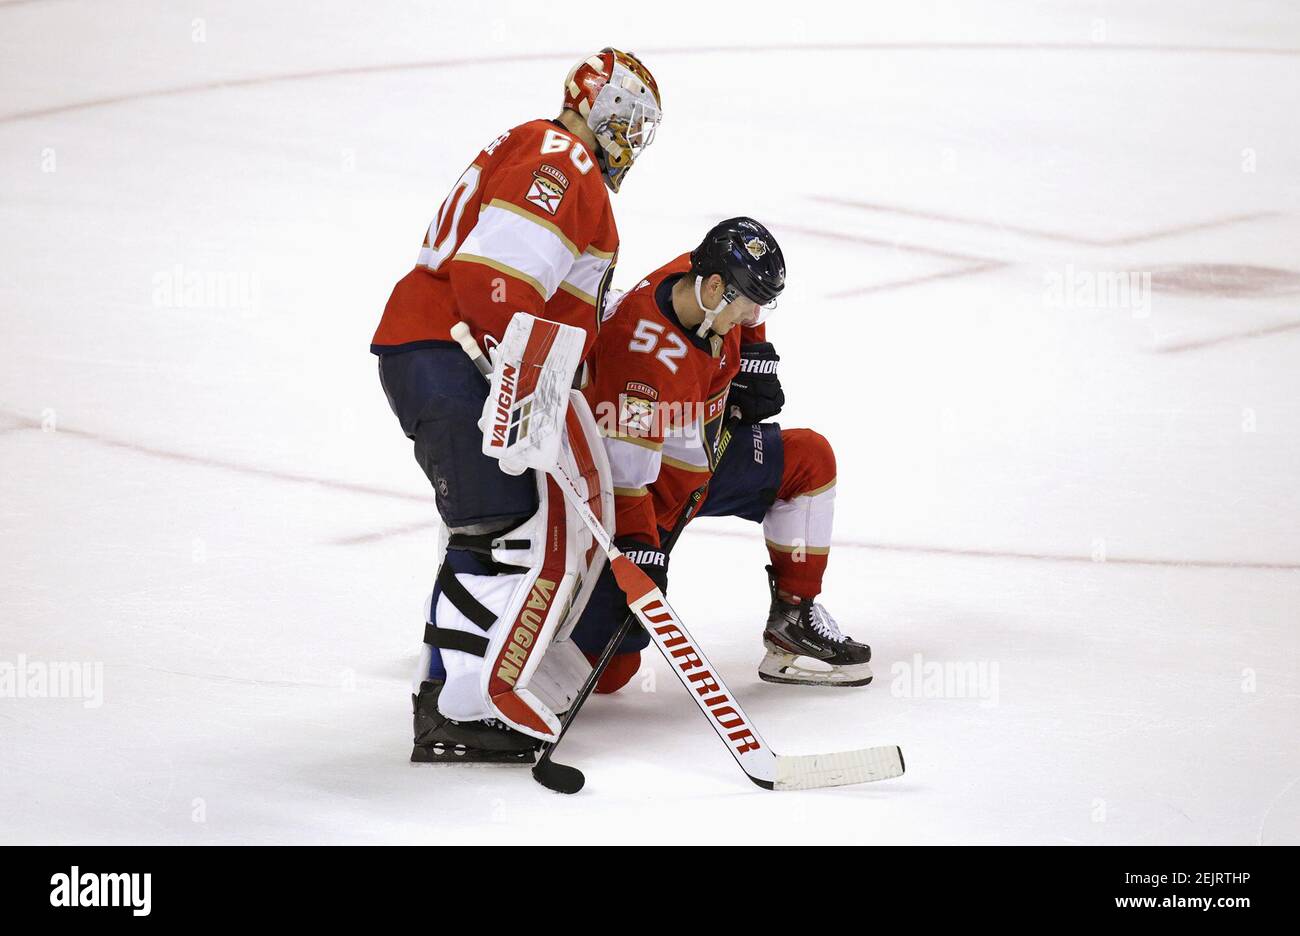 Florida Panthers goaltender Chris Driedger (60) and defenseman MacKenzie Weegar (52) react after the Boston Bruins' Torey Krug (47) scored the game-winning goal during overtimeÂ at the BB&T Center in Sunrise, Fla., on Thursday, March 5, 2020. The Bruins won, 2-1, in OT. (David Santiago/Miami Herald/TNS) Stock Photo